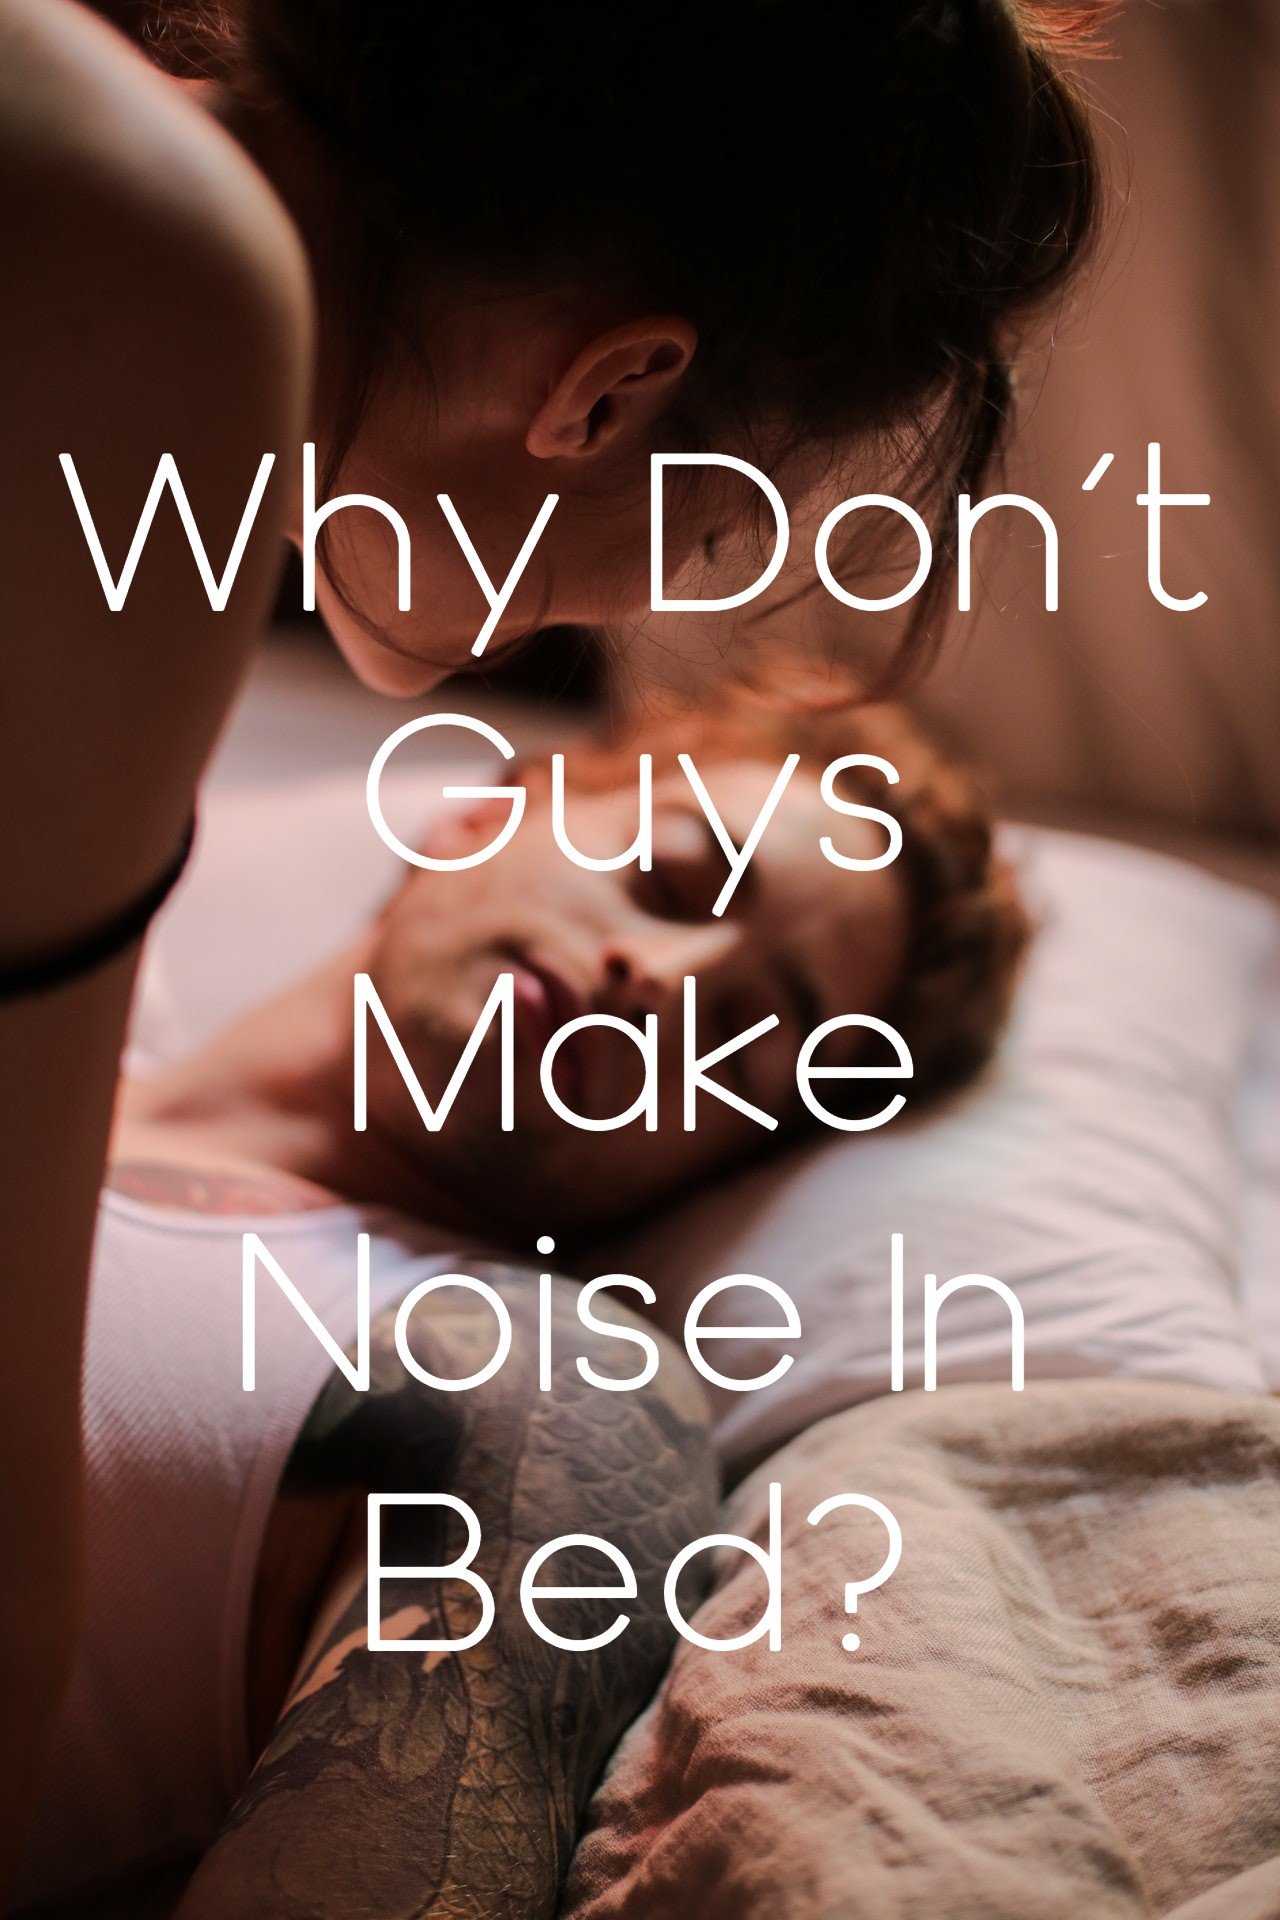 Why Don’t Guys Make Noise In Bed?